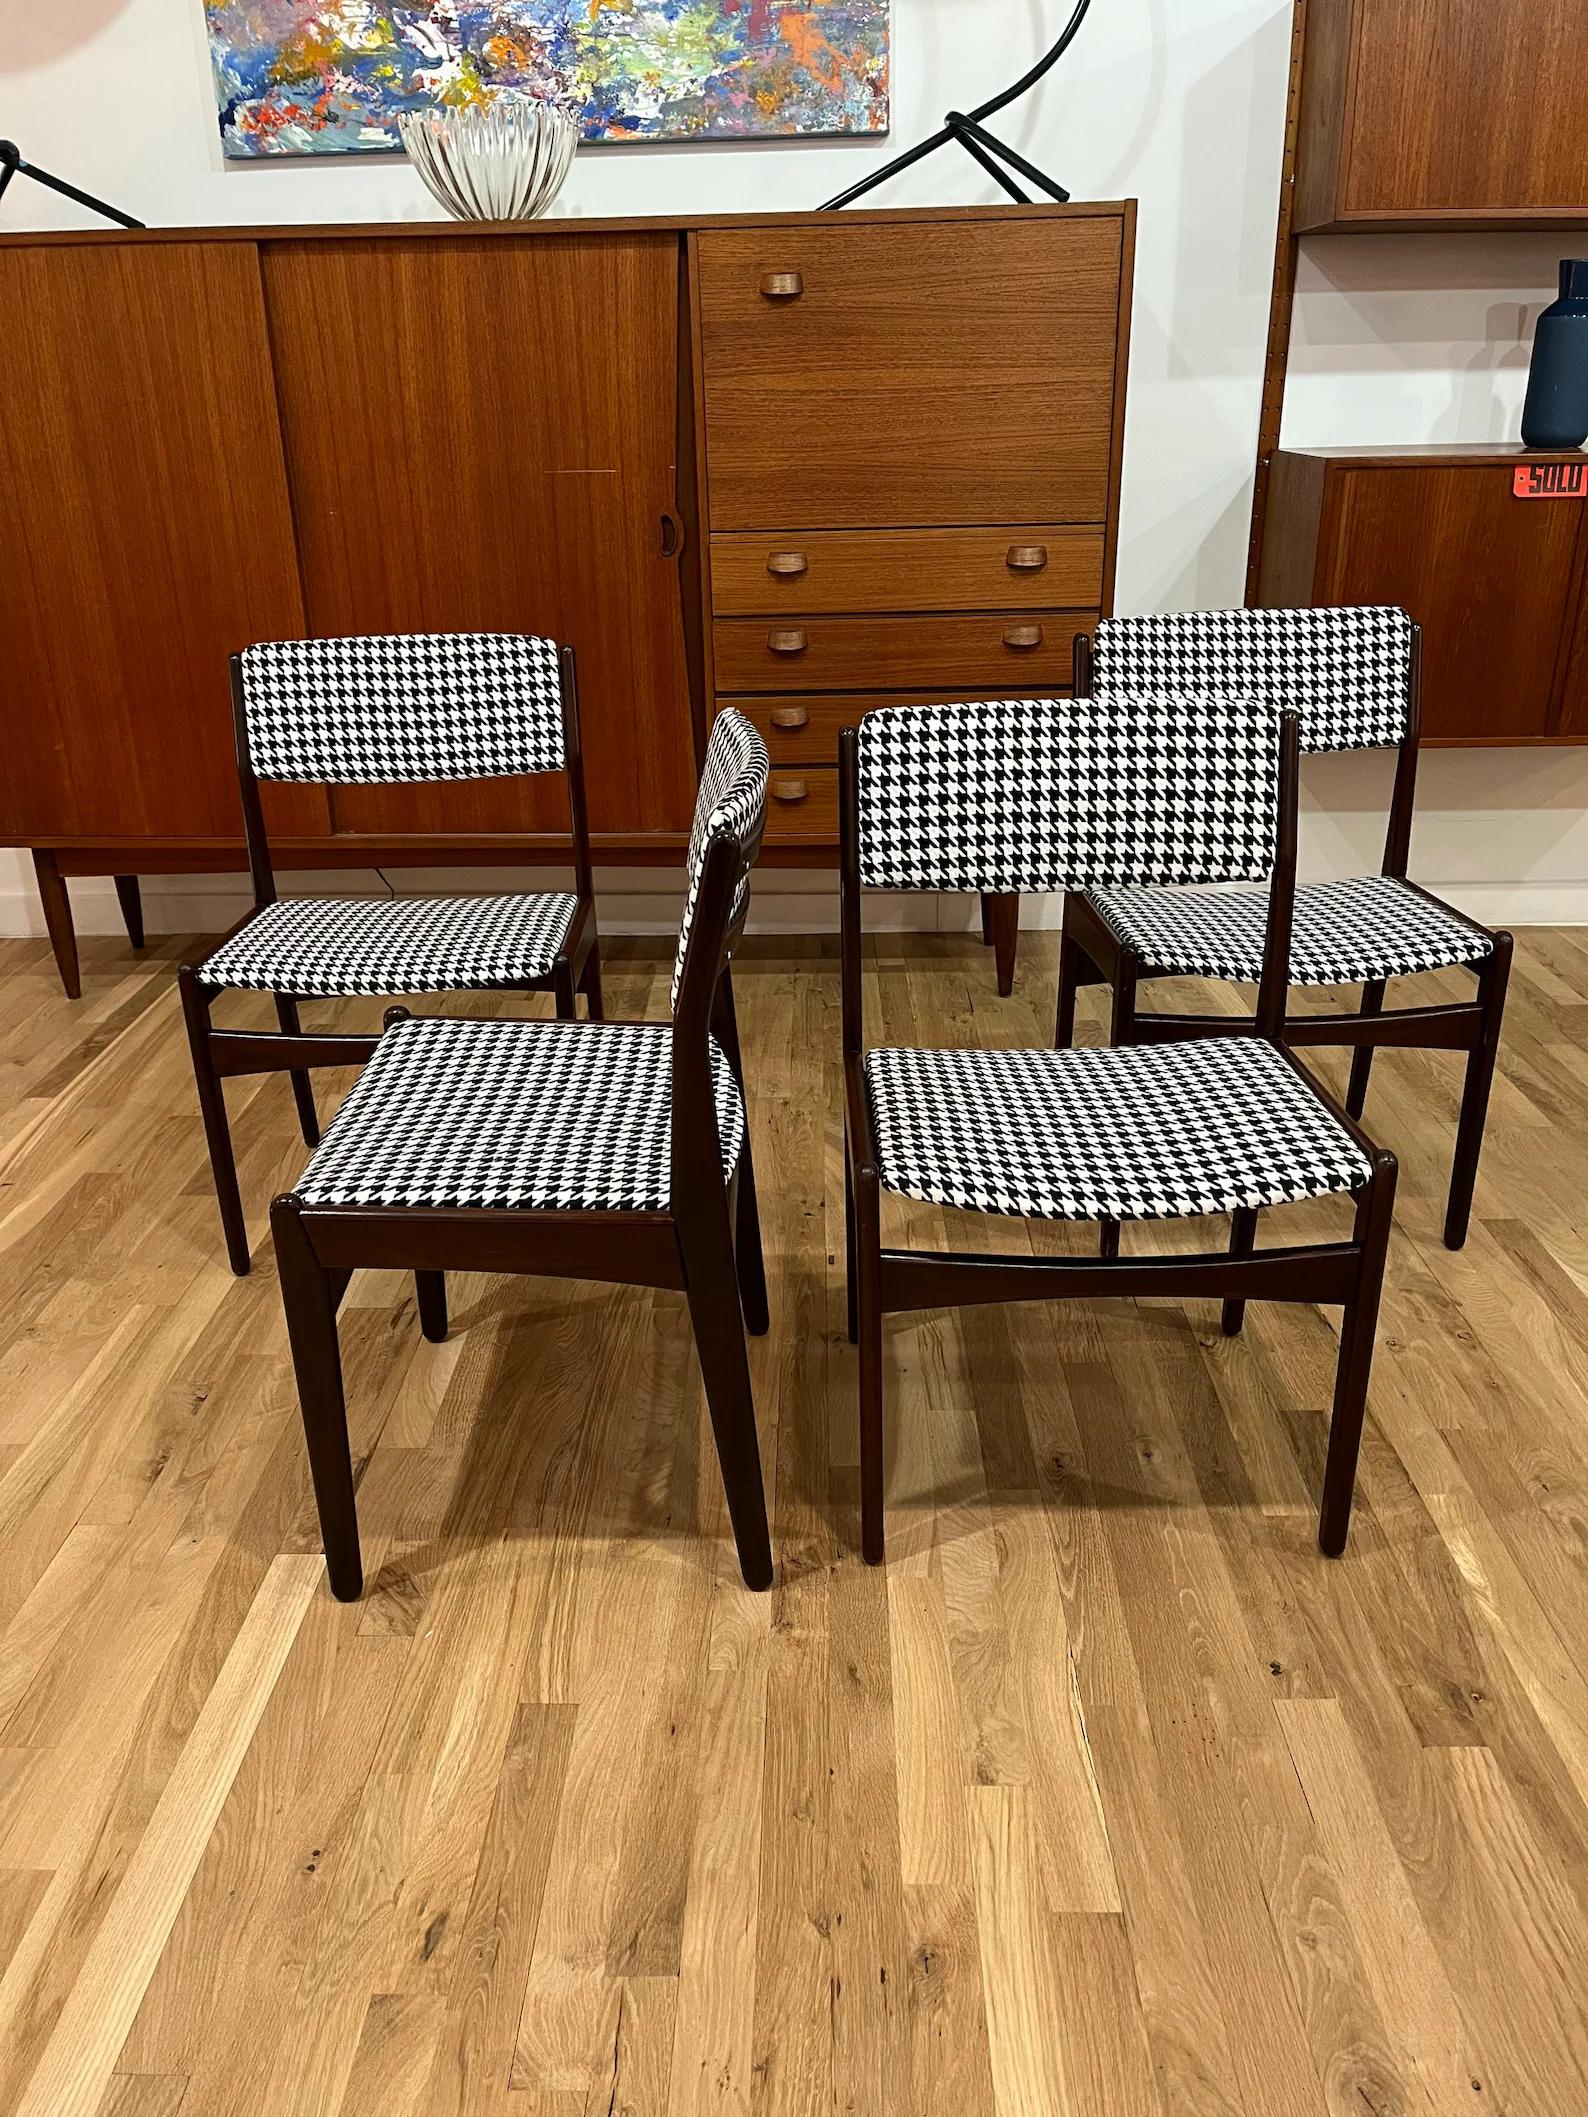 Danish Midcentury Curated Rosewood Dining Chairs with New Houndstooth Upholster Set 0f For Sale